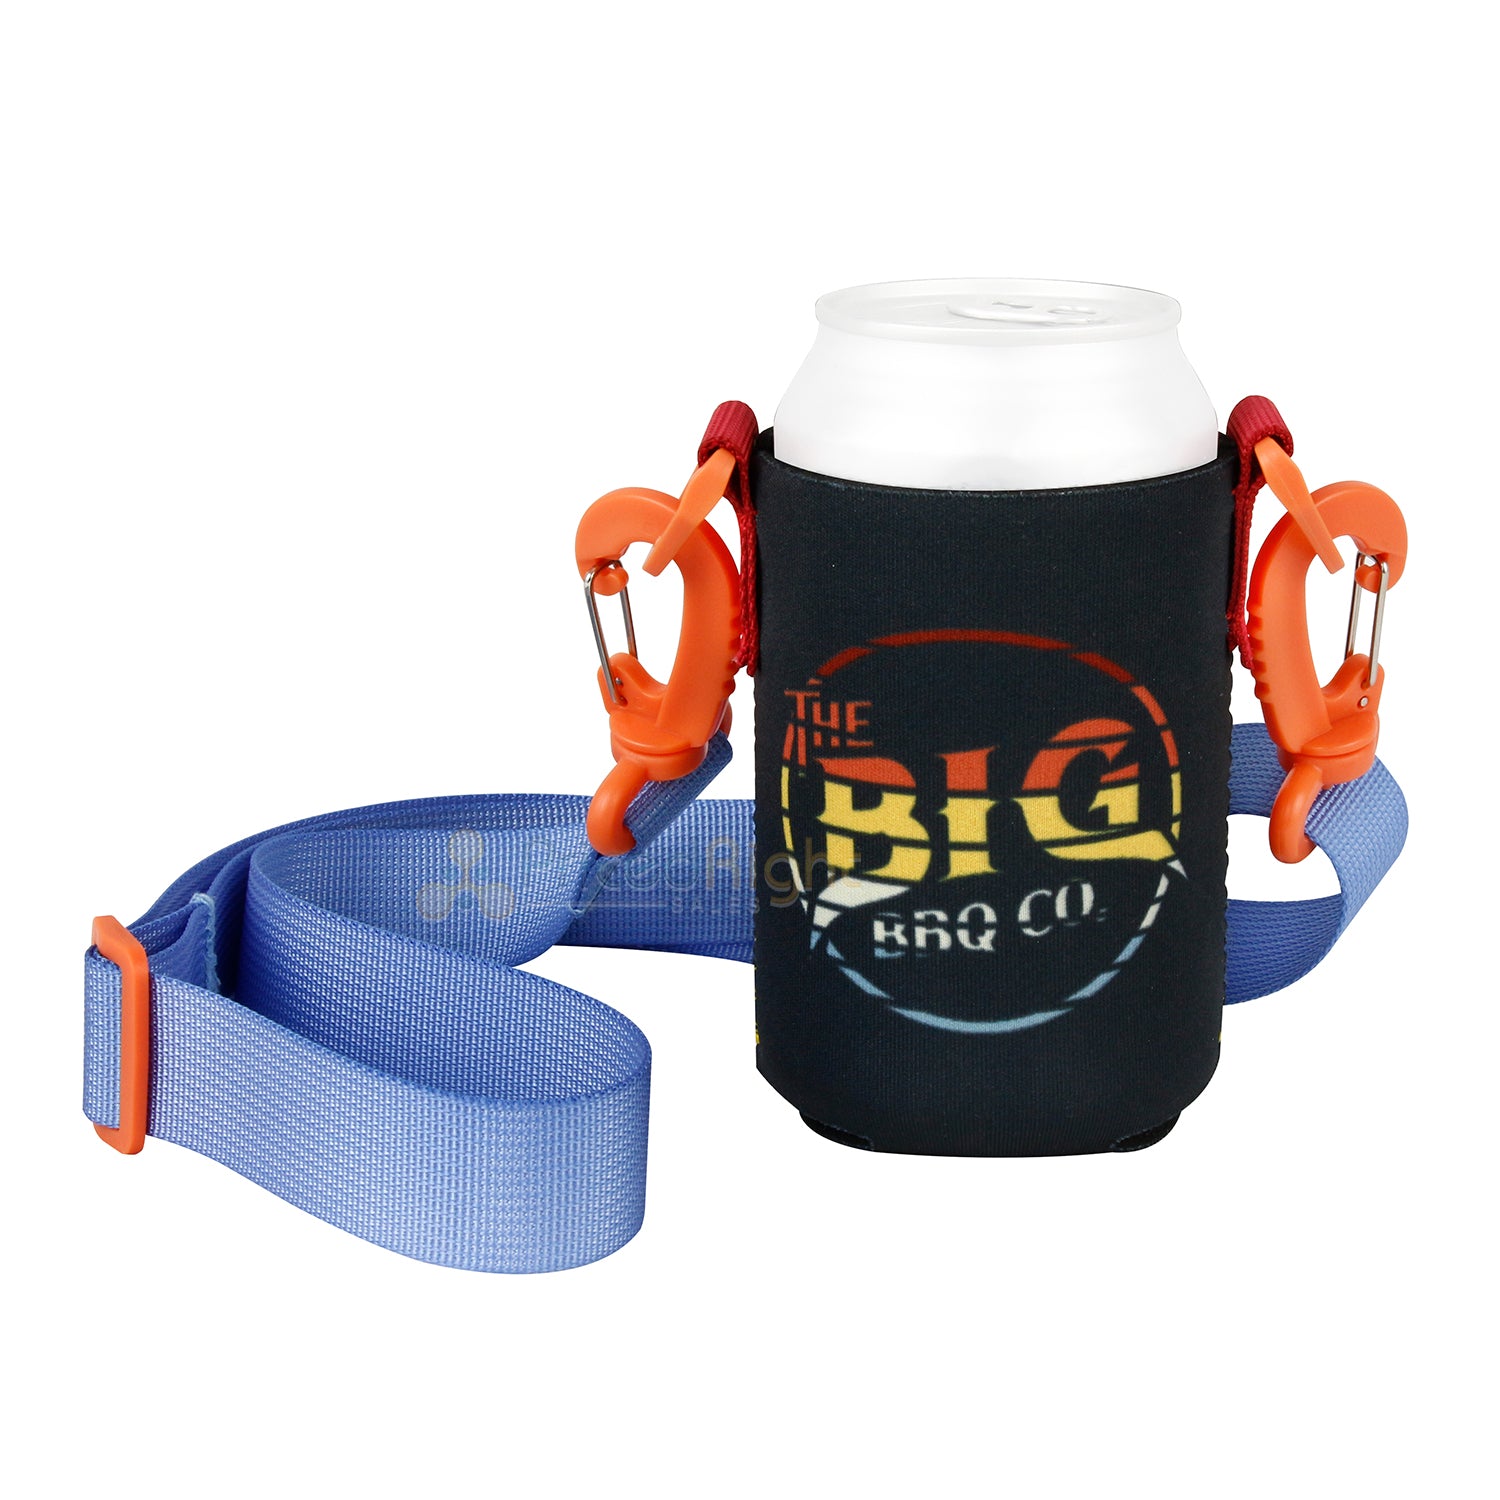 Can Koozie Lanyard Necklace Big BBQ Company For Cans & Bottles W/ Clip-On Strap